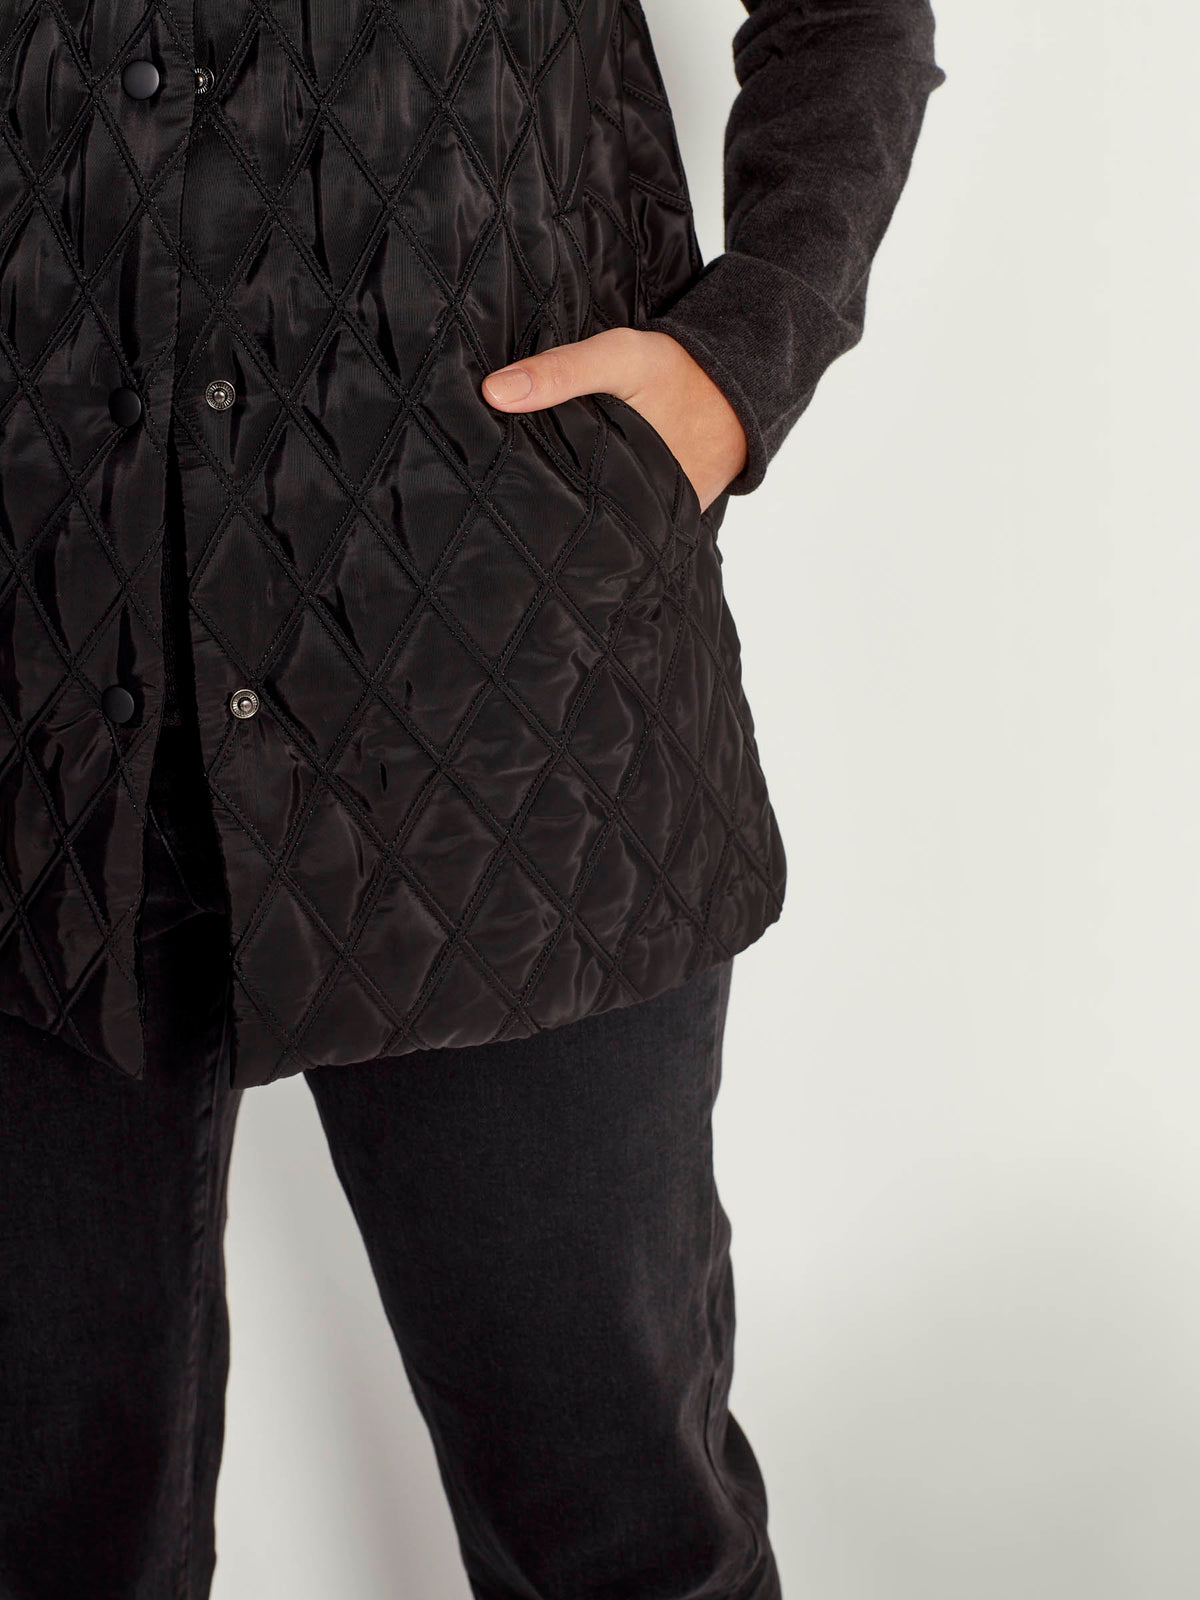 Daily Vest (Quilted Diamond) Black